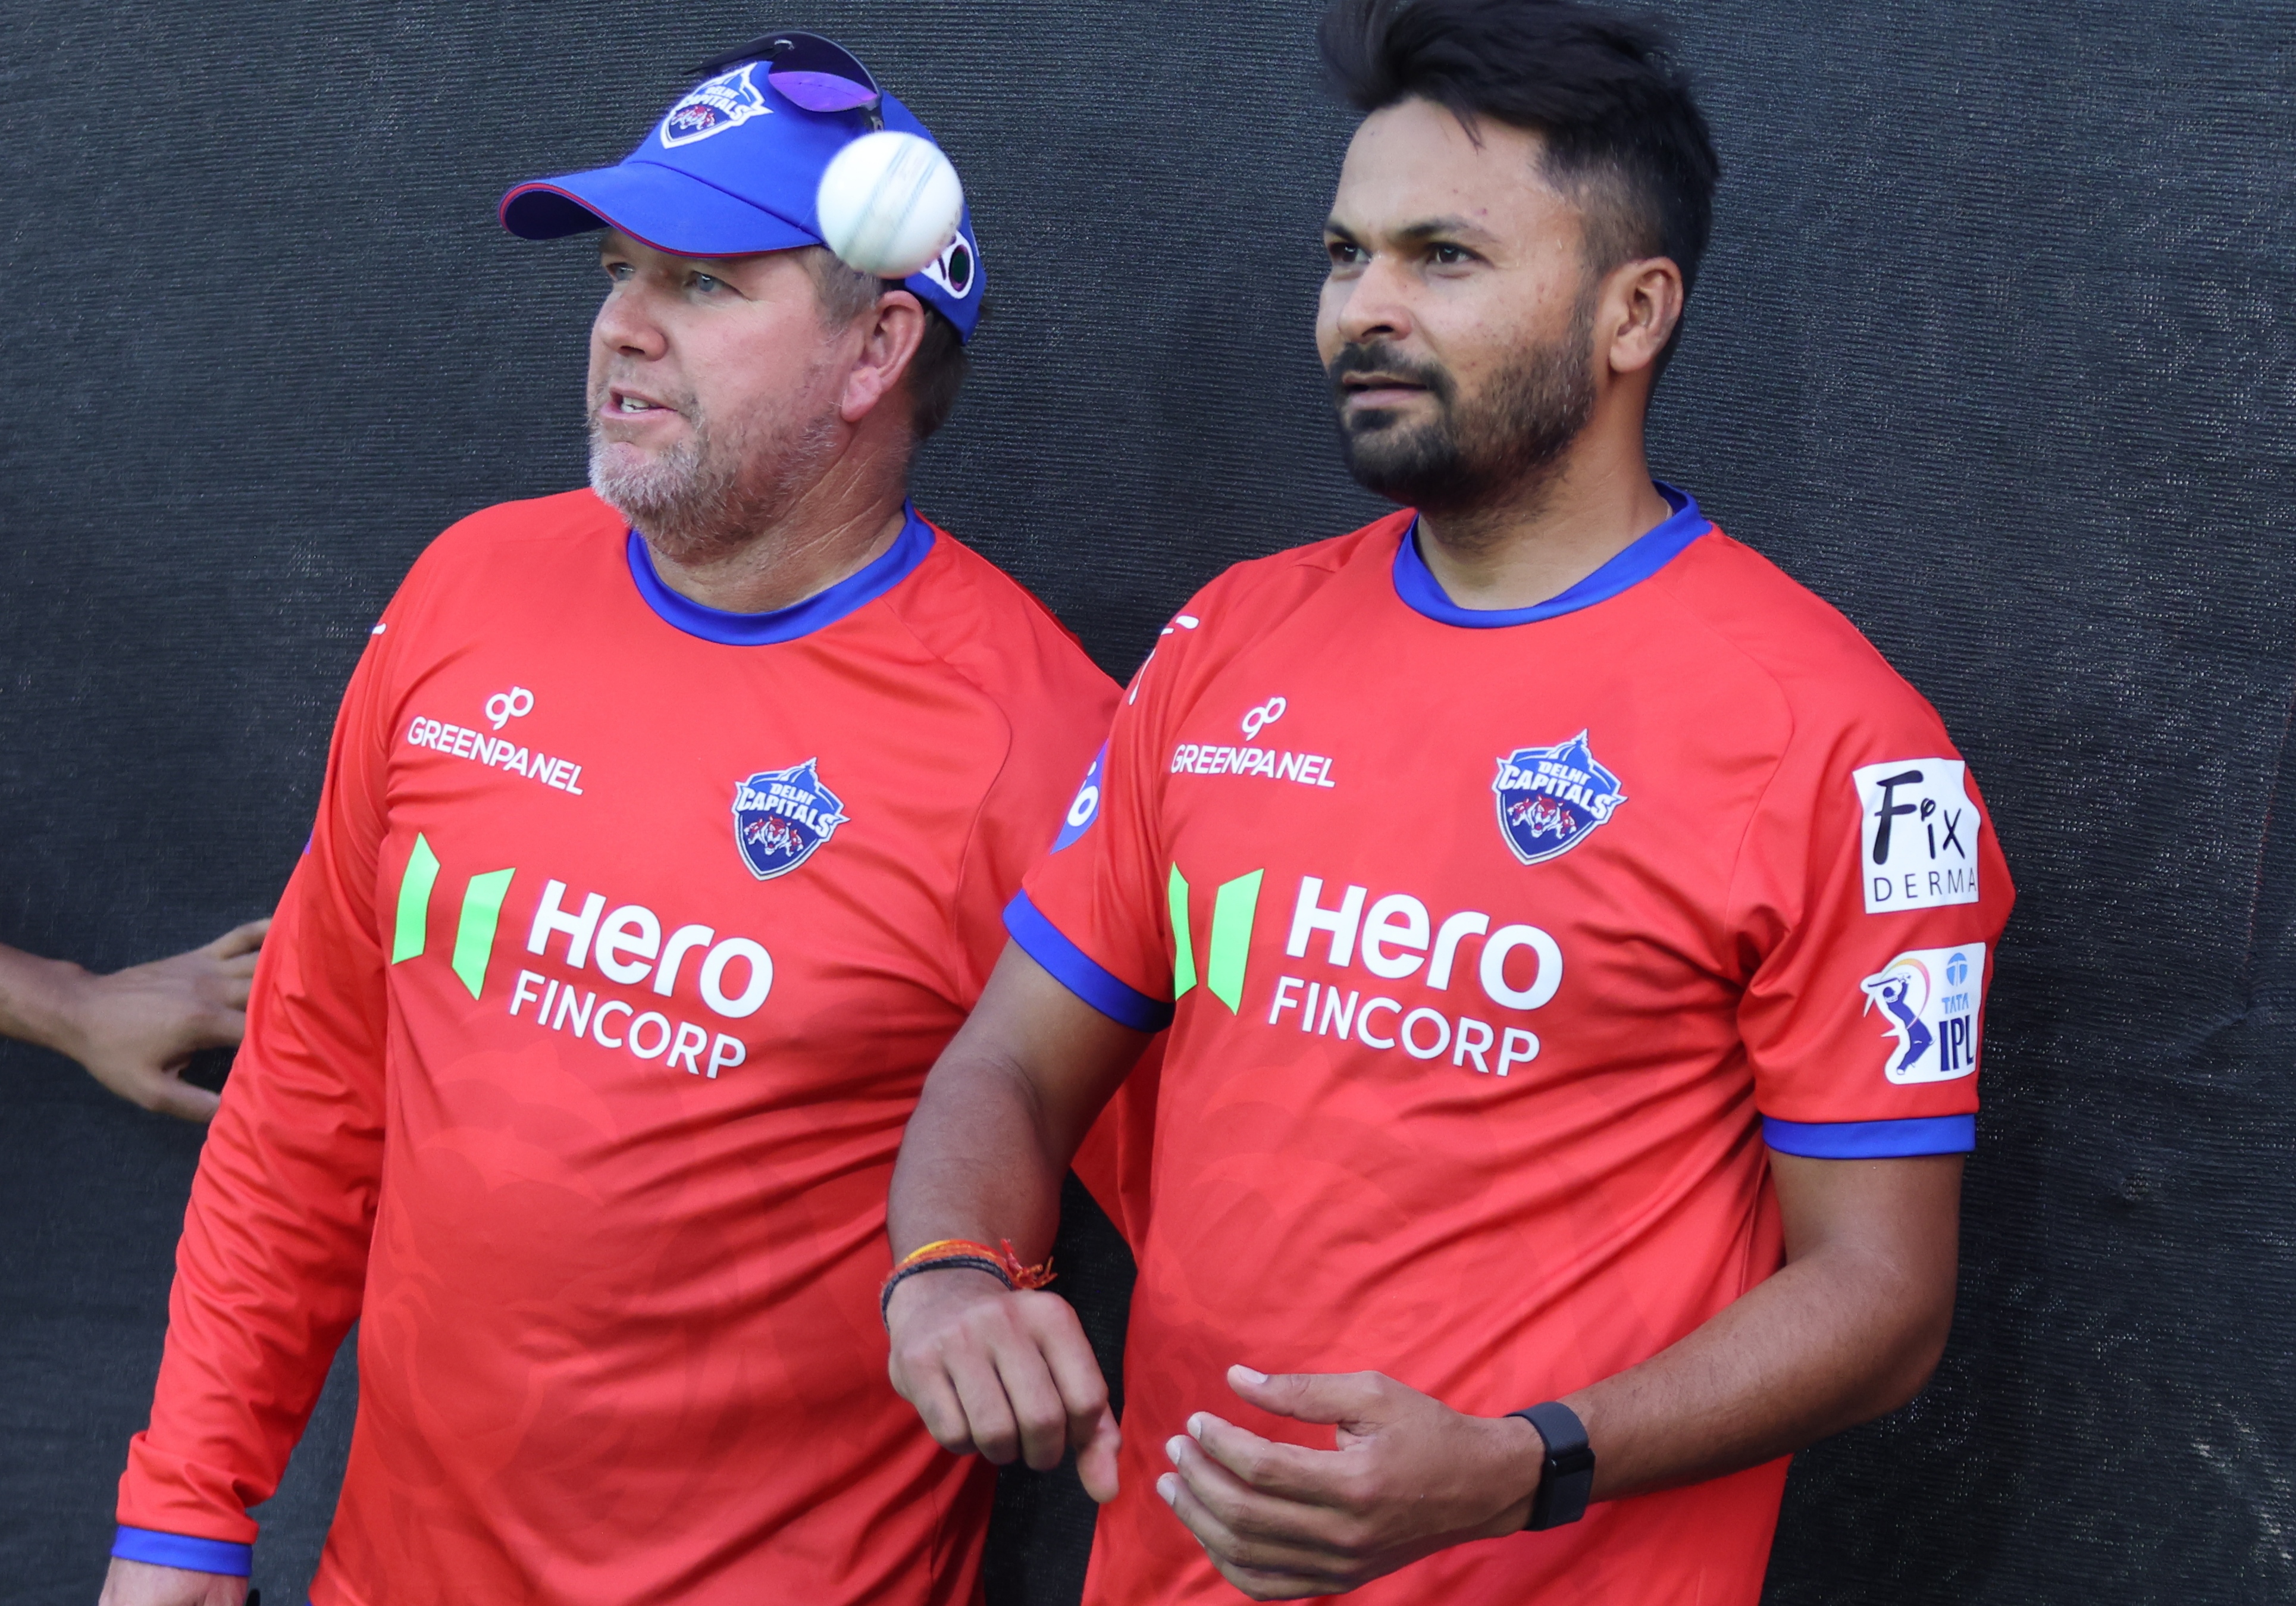 Delhi Capitals' pacer Mukesh Kumar and bowling coach James Hopes reflect on team's "good night" in Ahmedabad